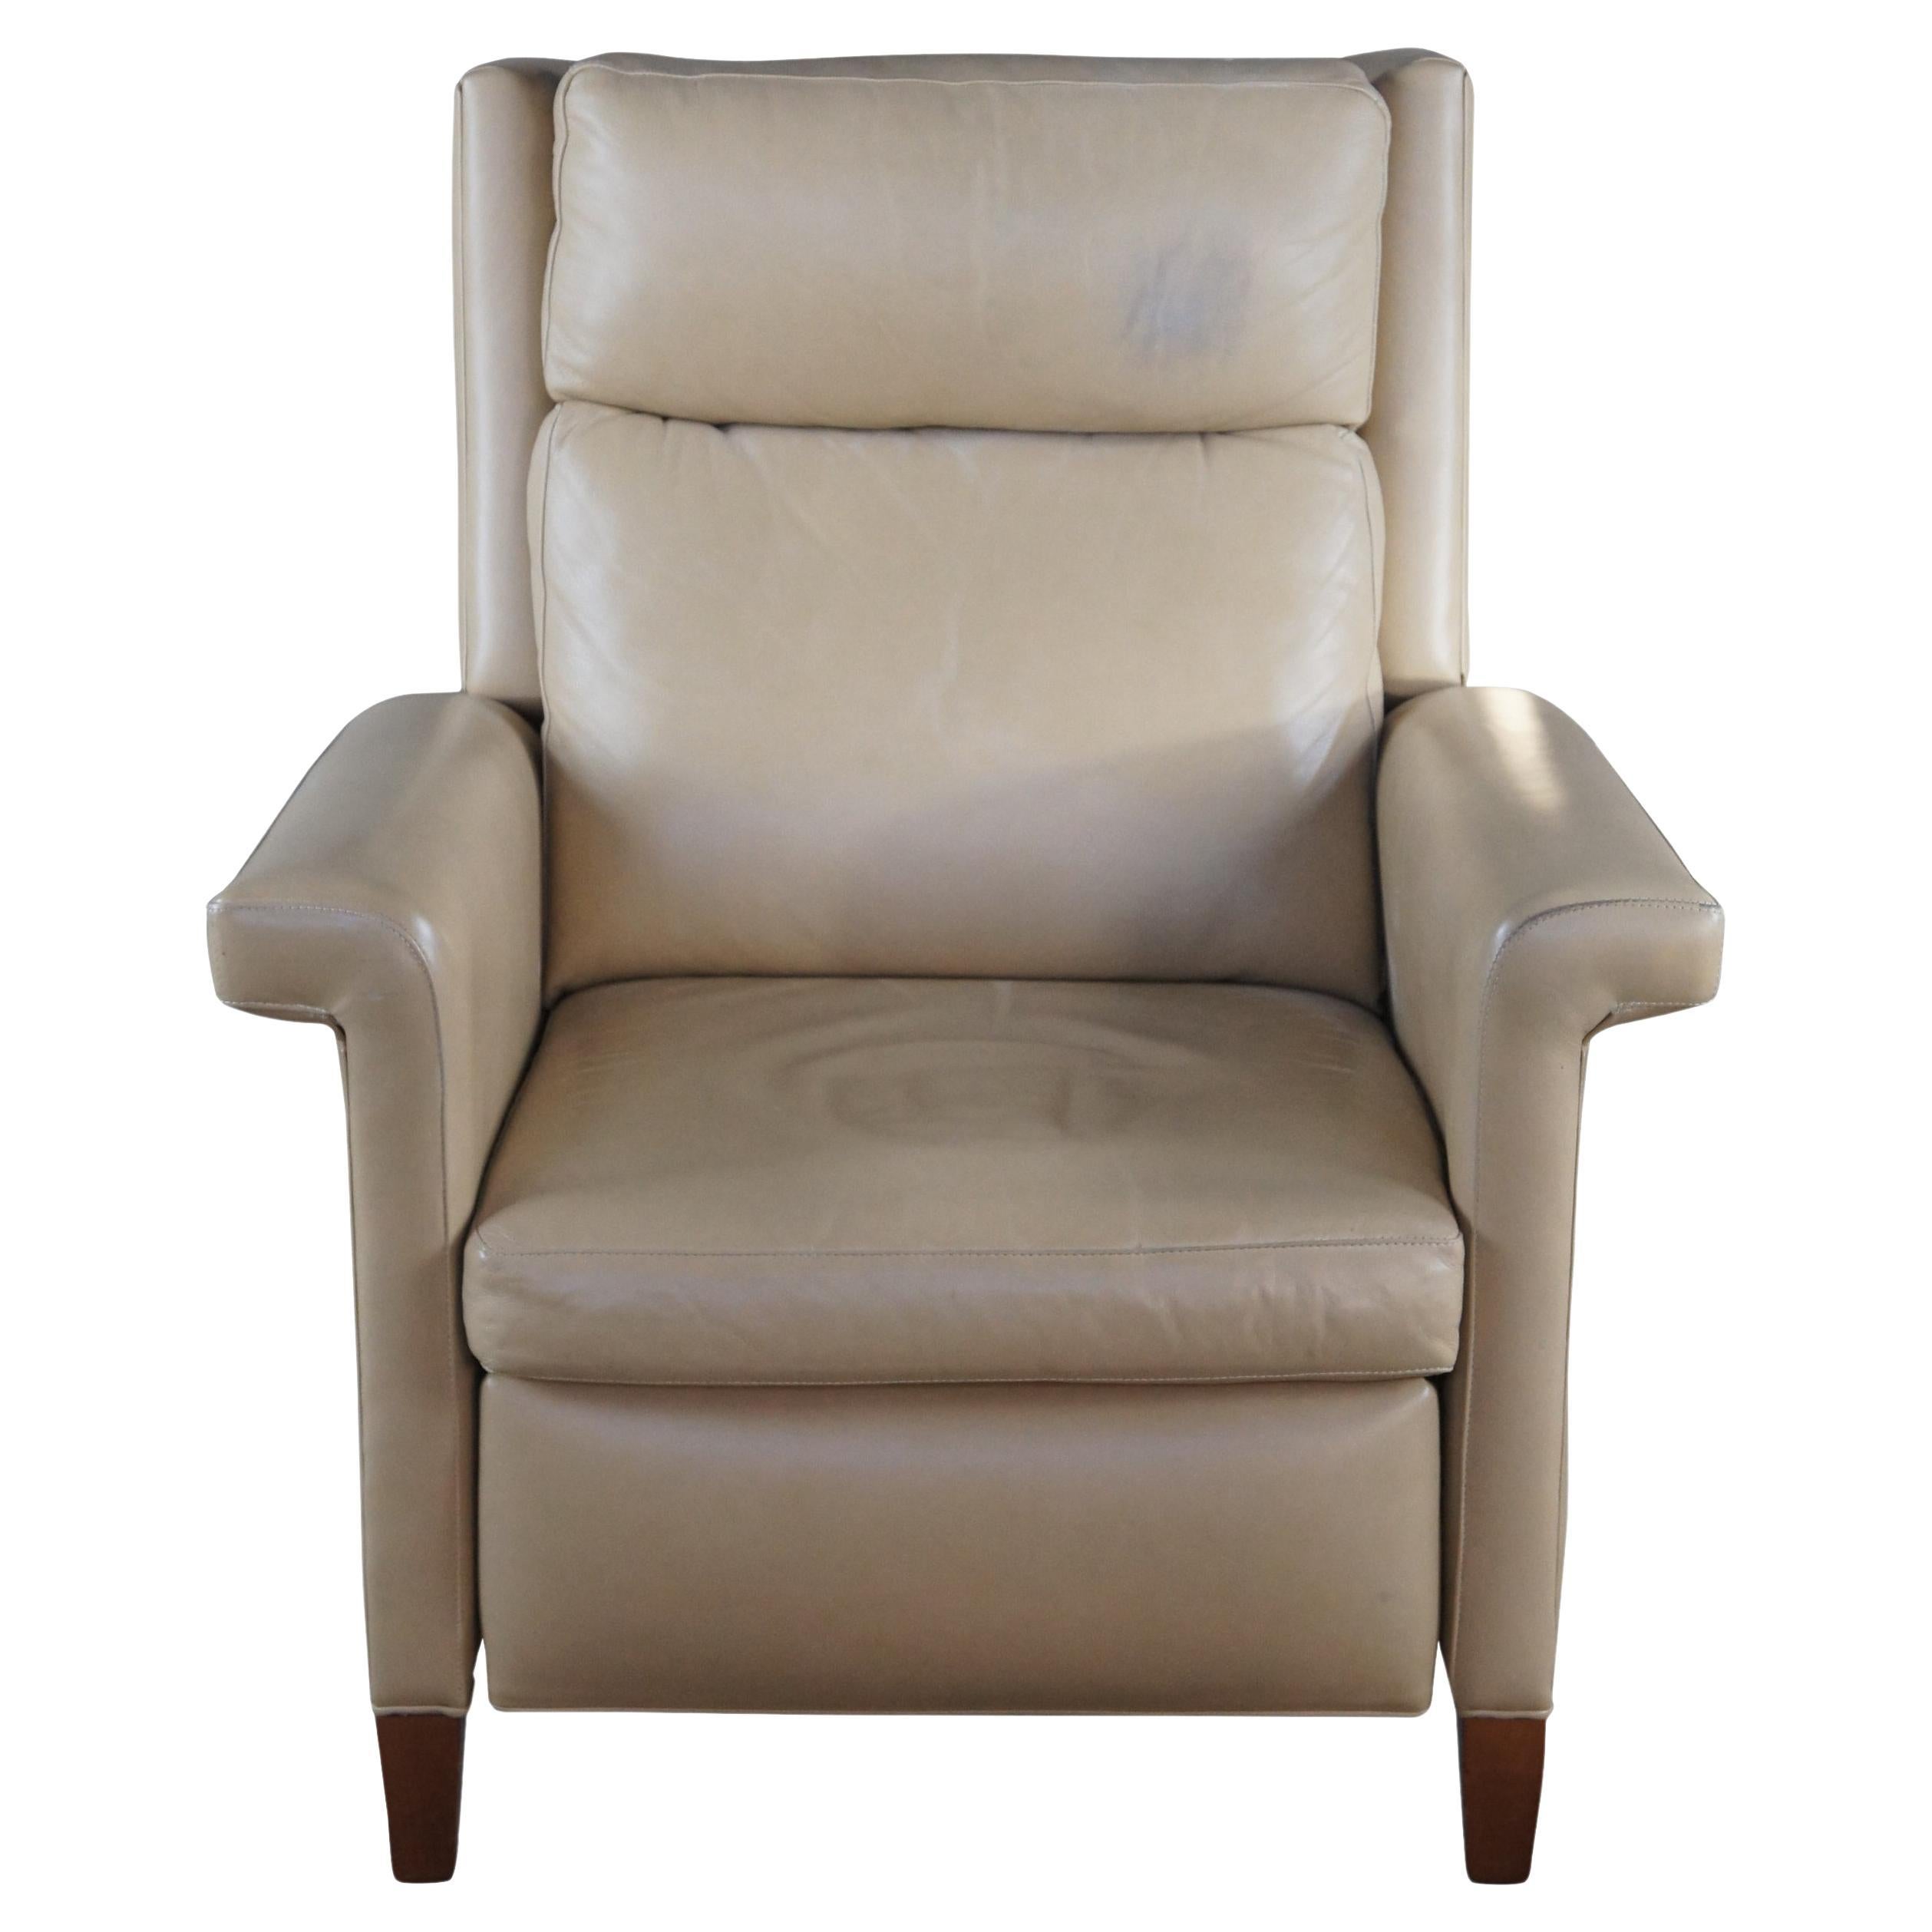 Hancock & Moore motion seating collection Ghent push back recliner. Cream leather fabric NC7000.
MSRP 6,000$

Somewhere between a chic accent chair and a laid-back, casual recliner is the high leg recliner. This model is an impeccable example of